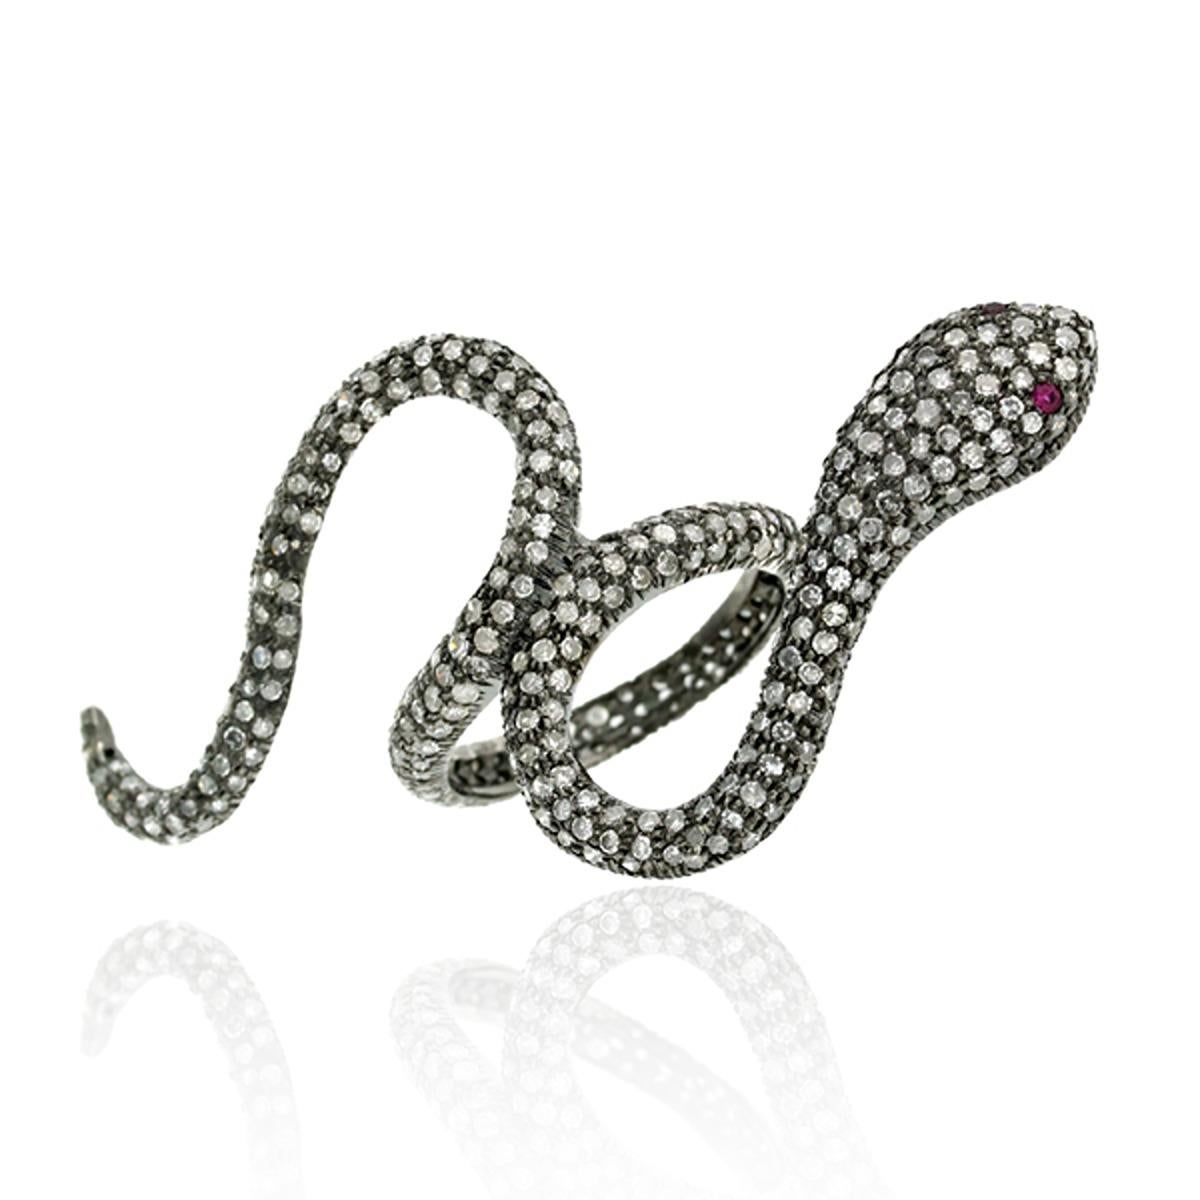 Mixed Cut Pave Diamonds Snake Shaped Ring With Ruby Eyes For Sale